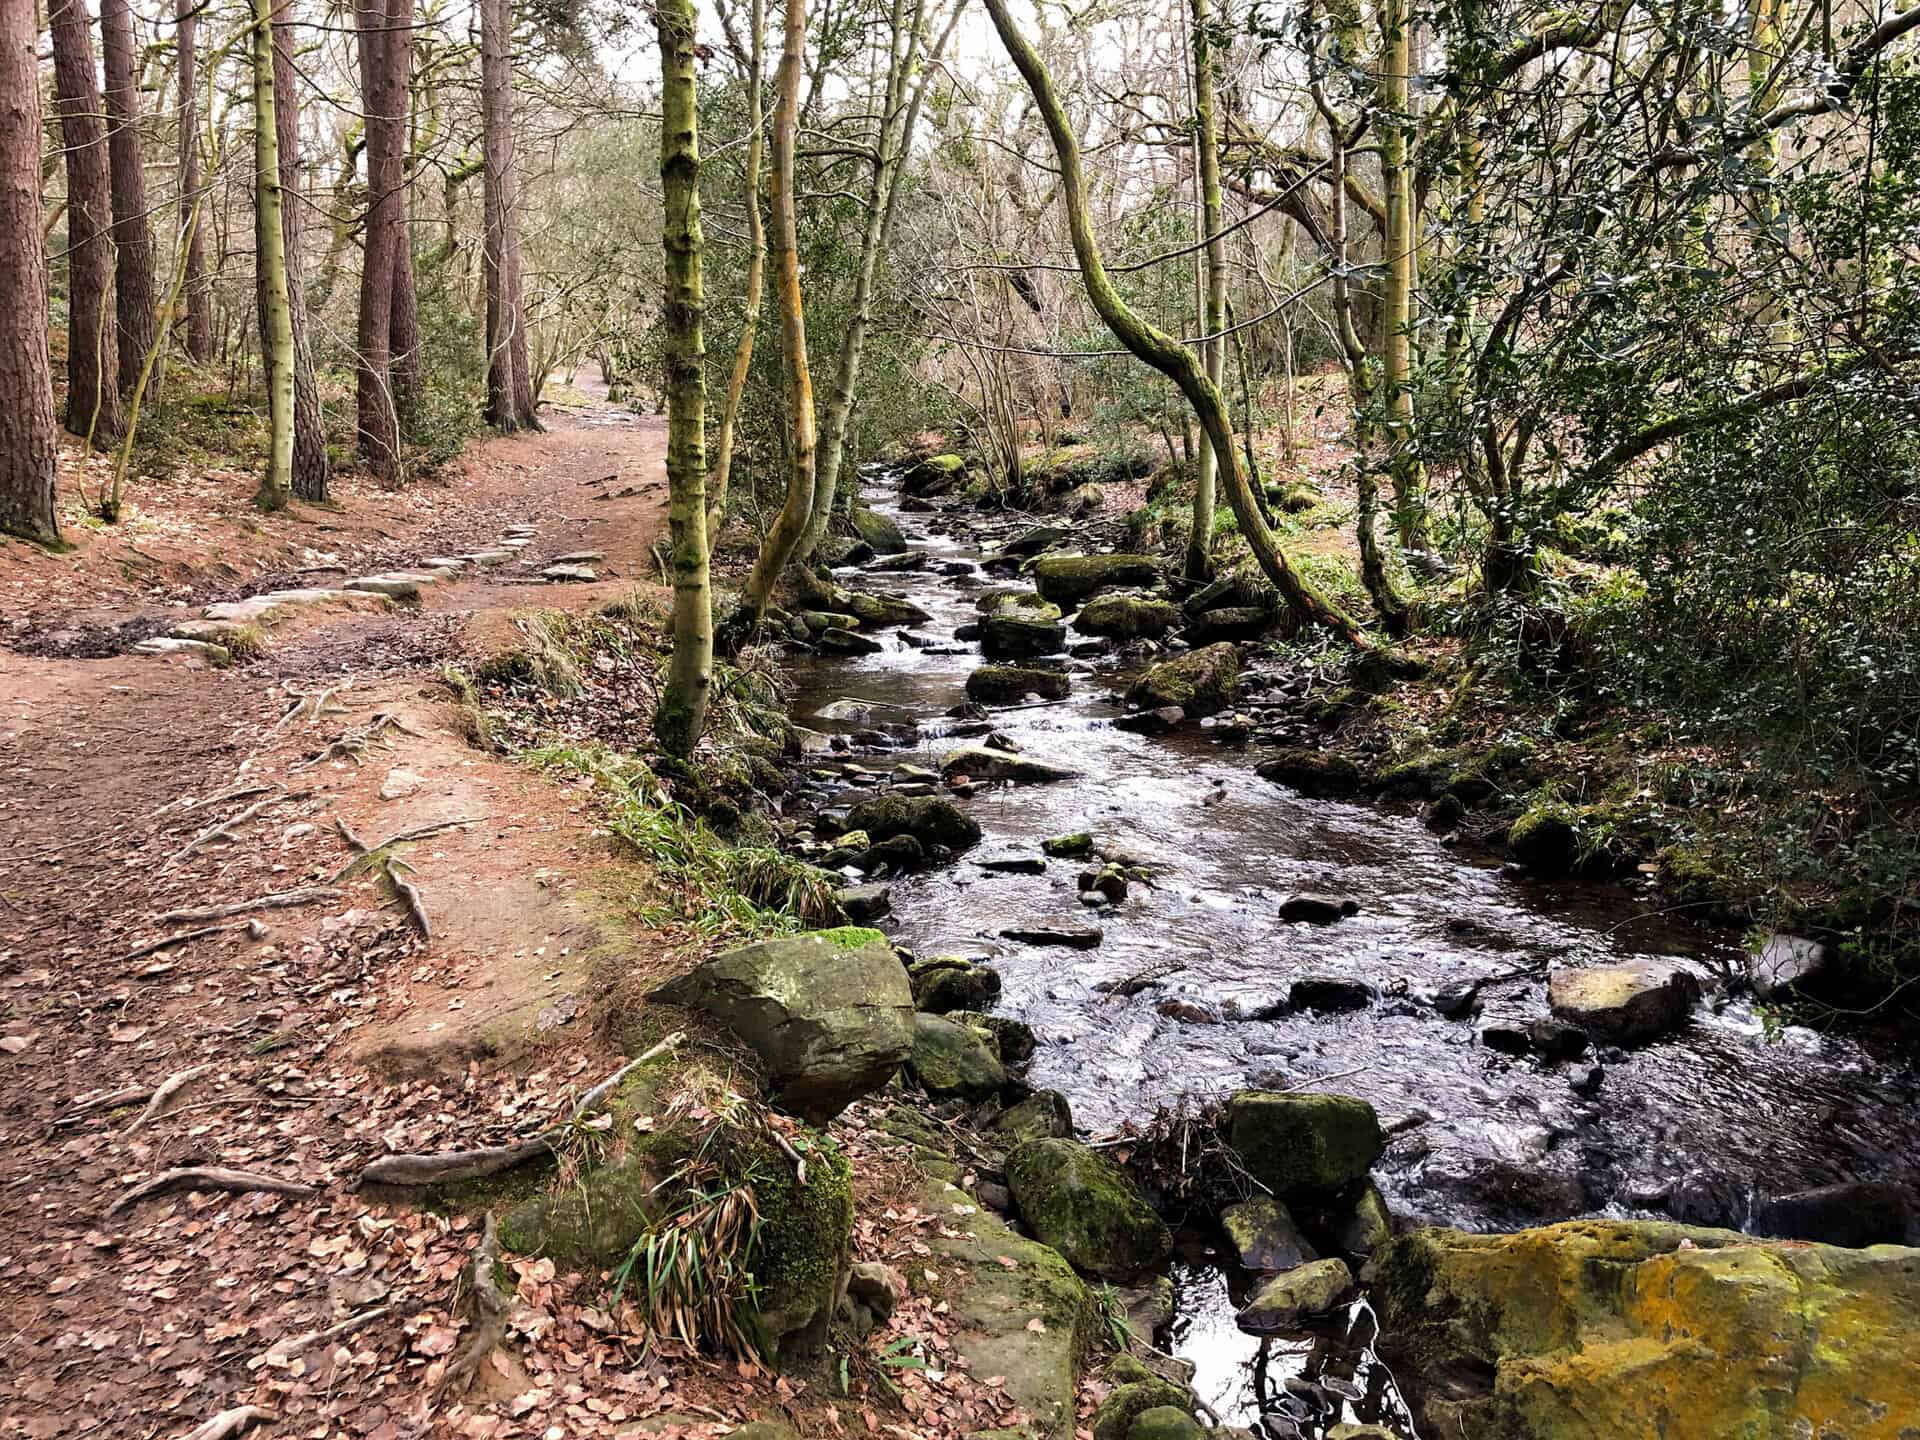 May Beck flowing through woodland towards Falling Foss. From number 12 in my list of the best walks in the North York Moors.